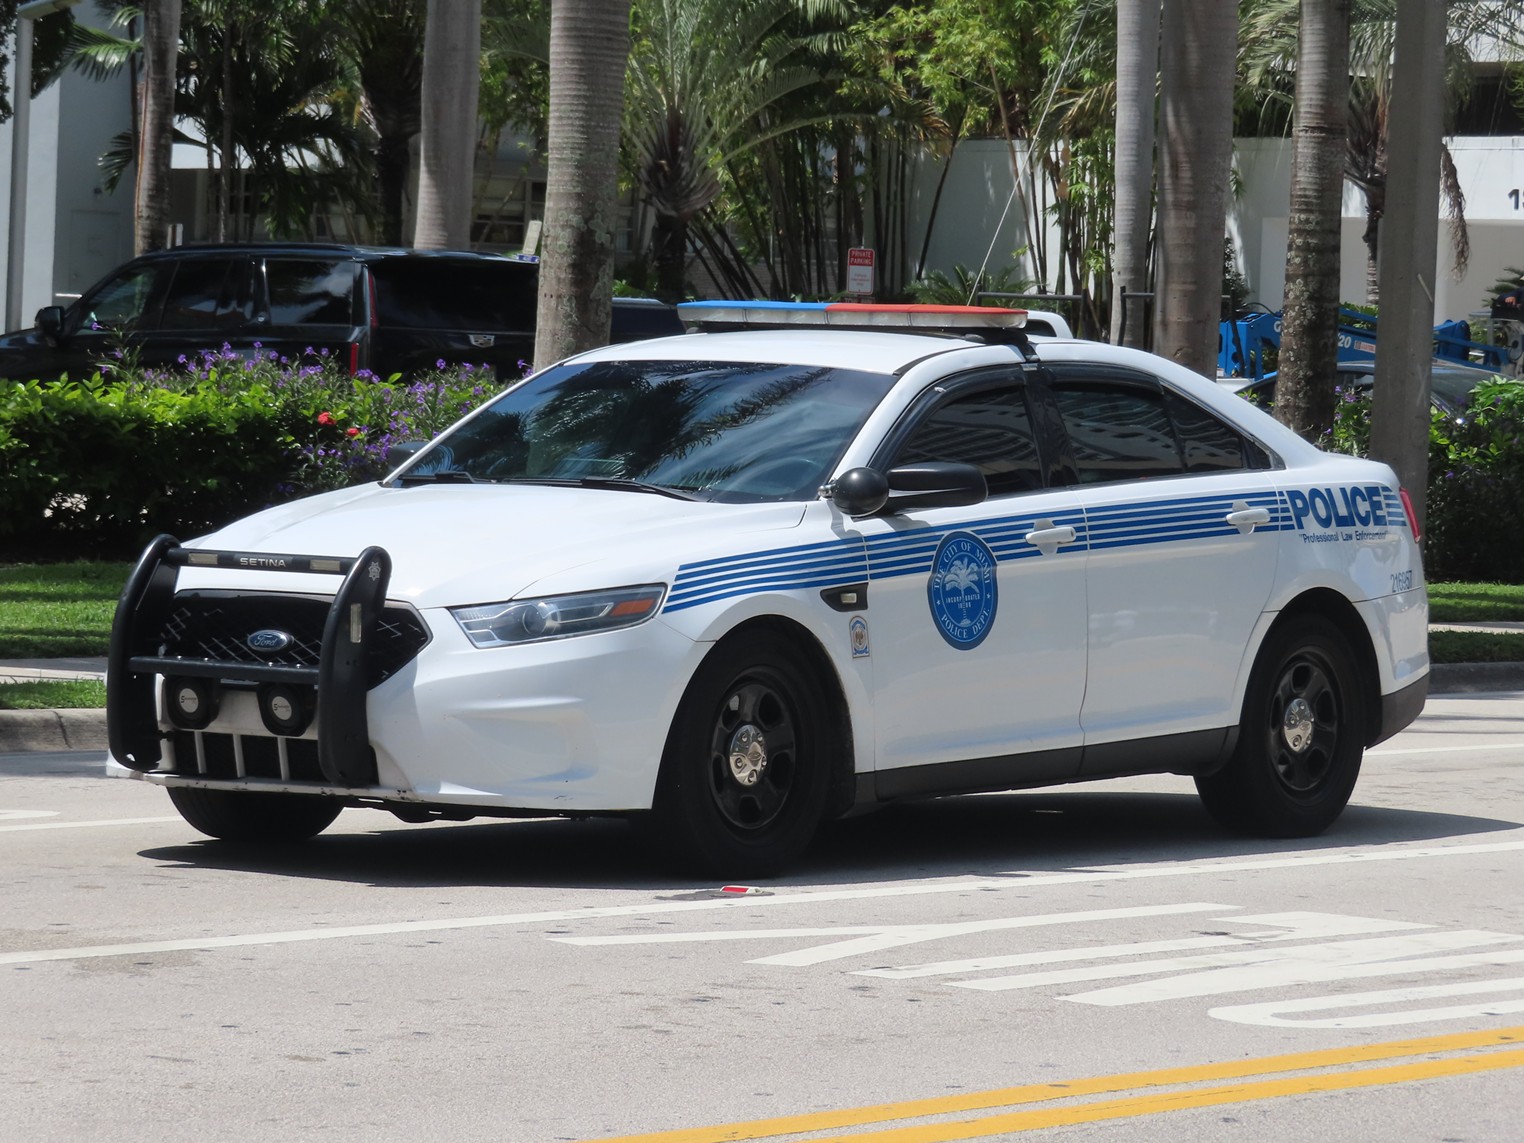 Miami Police Officer Went Golfing After Hit-and-Run | Miami New Times